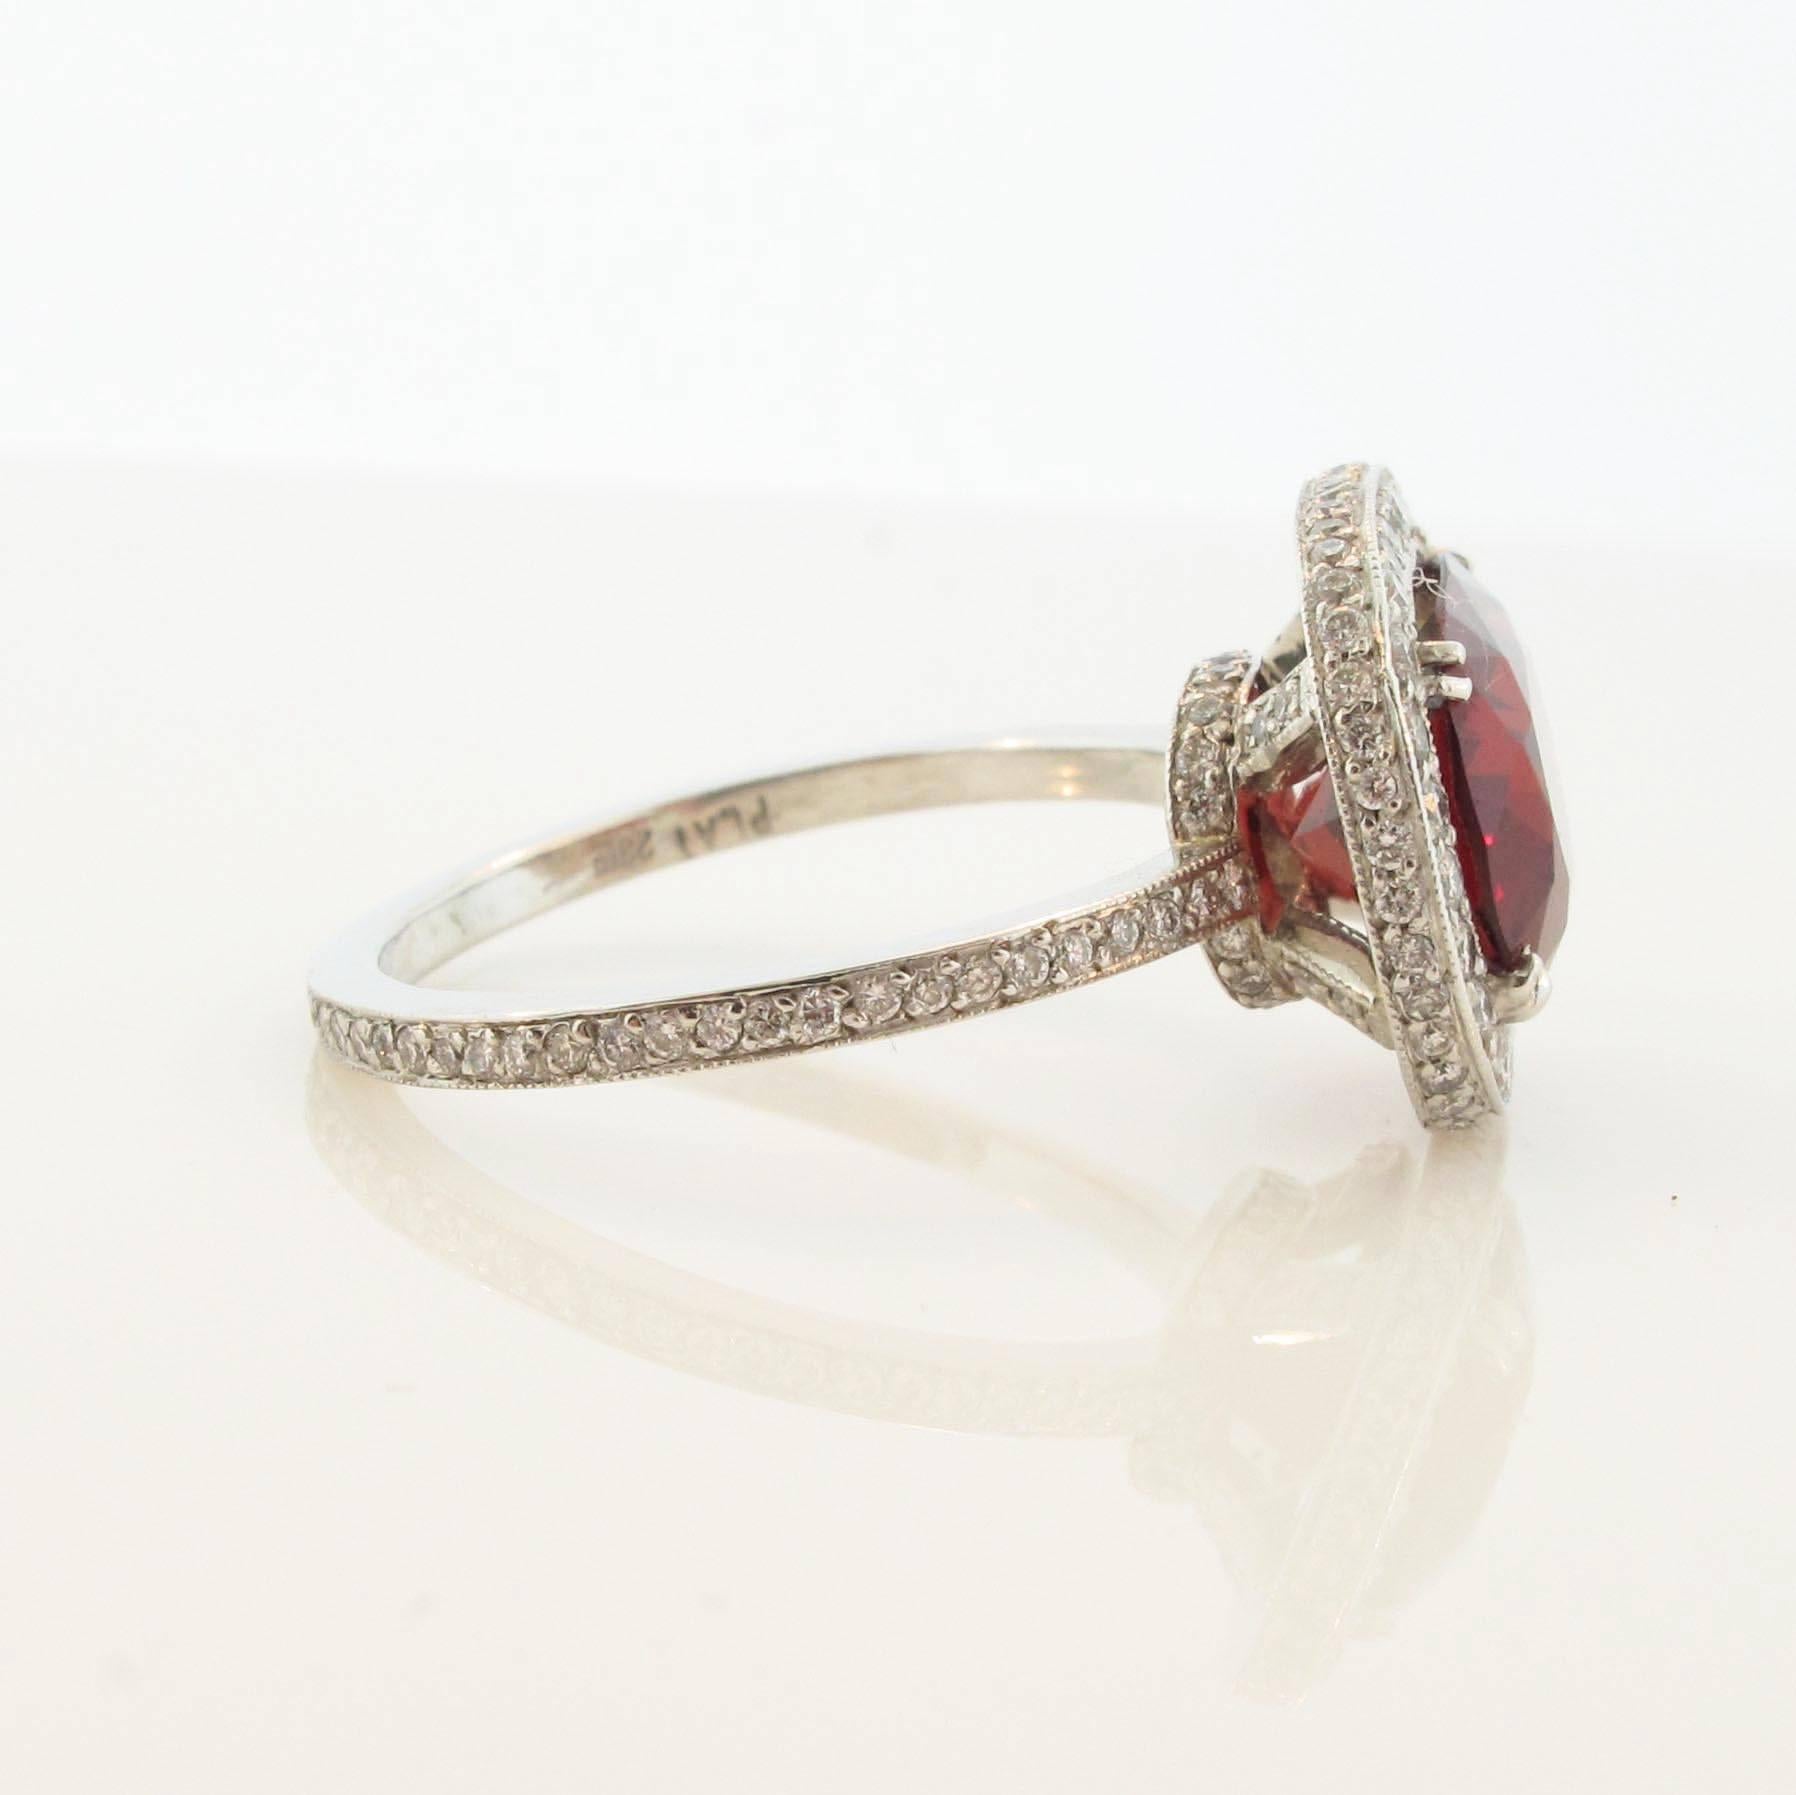 A spectacular diamond, and Spinel platinum ring. The 3.40 carat Spinel is the optimum deep red color one would desire in a ring like this. This easy to wear ring can be dressed up or dressed down for any occasion. The band has pave diamonds on both